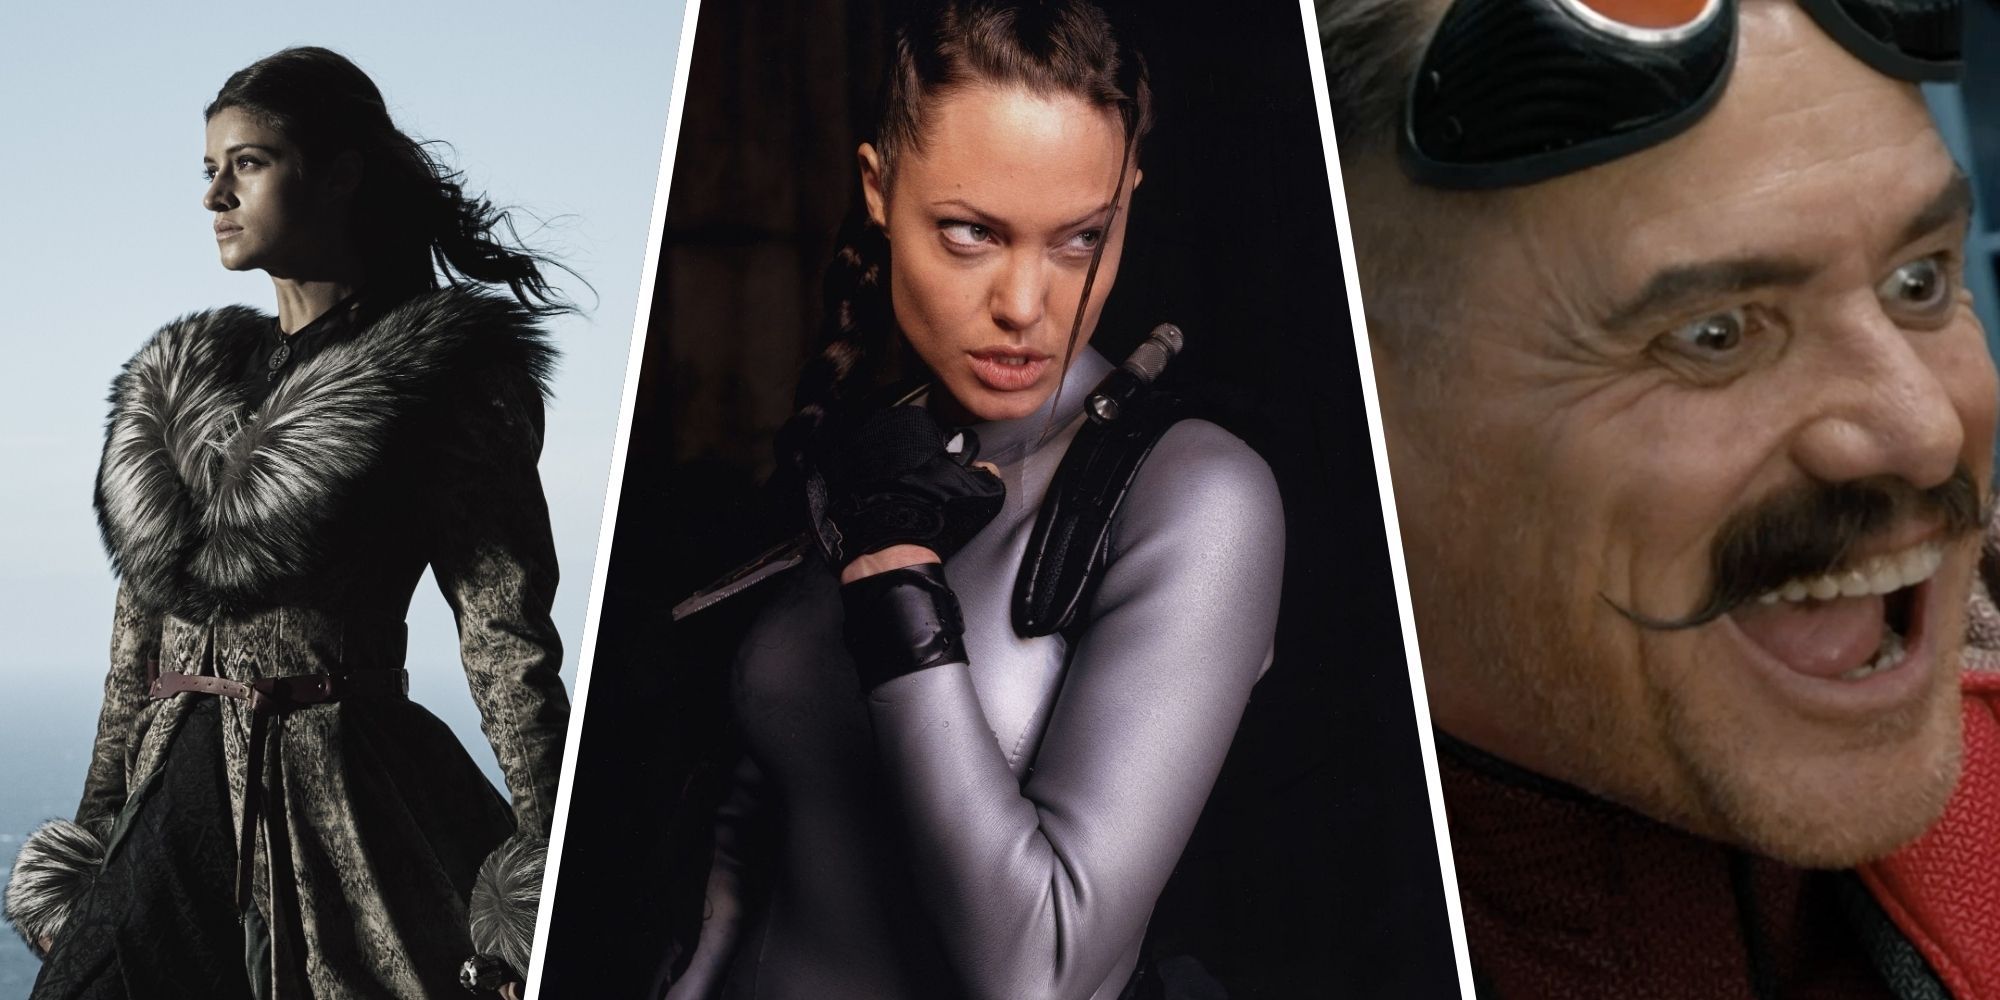 Anya Chalotra as Yennefer in The Witcher Angelina Jolie as Lara Croft in Tomb Raider and Jim Carrey as Dr Robotnik in Sonic the Hedgehog